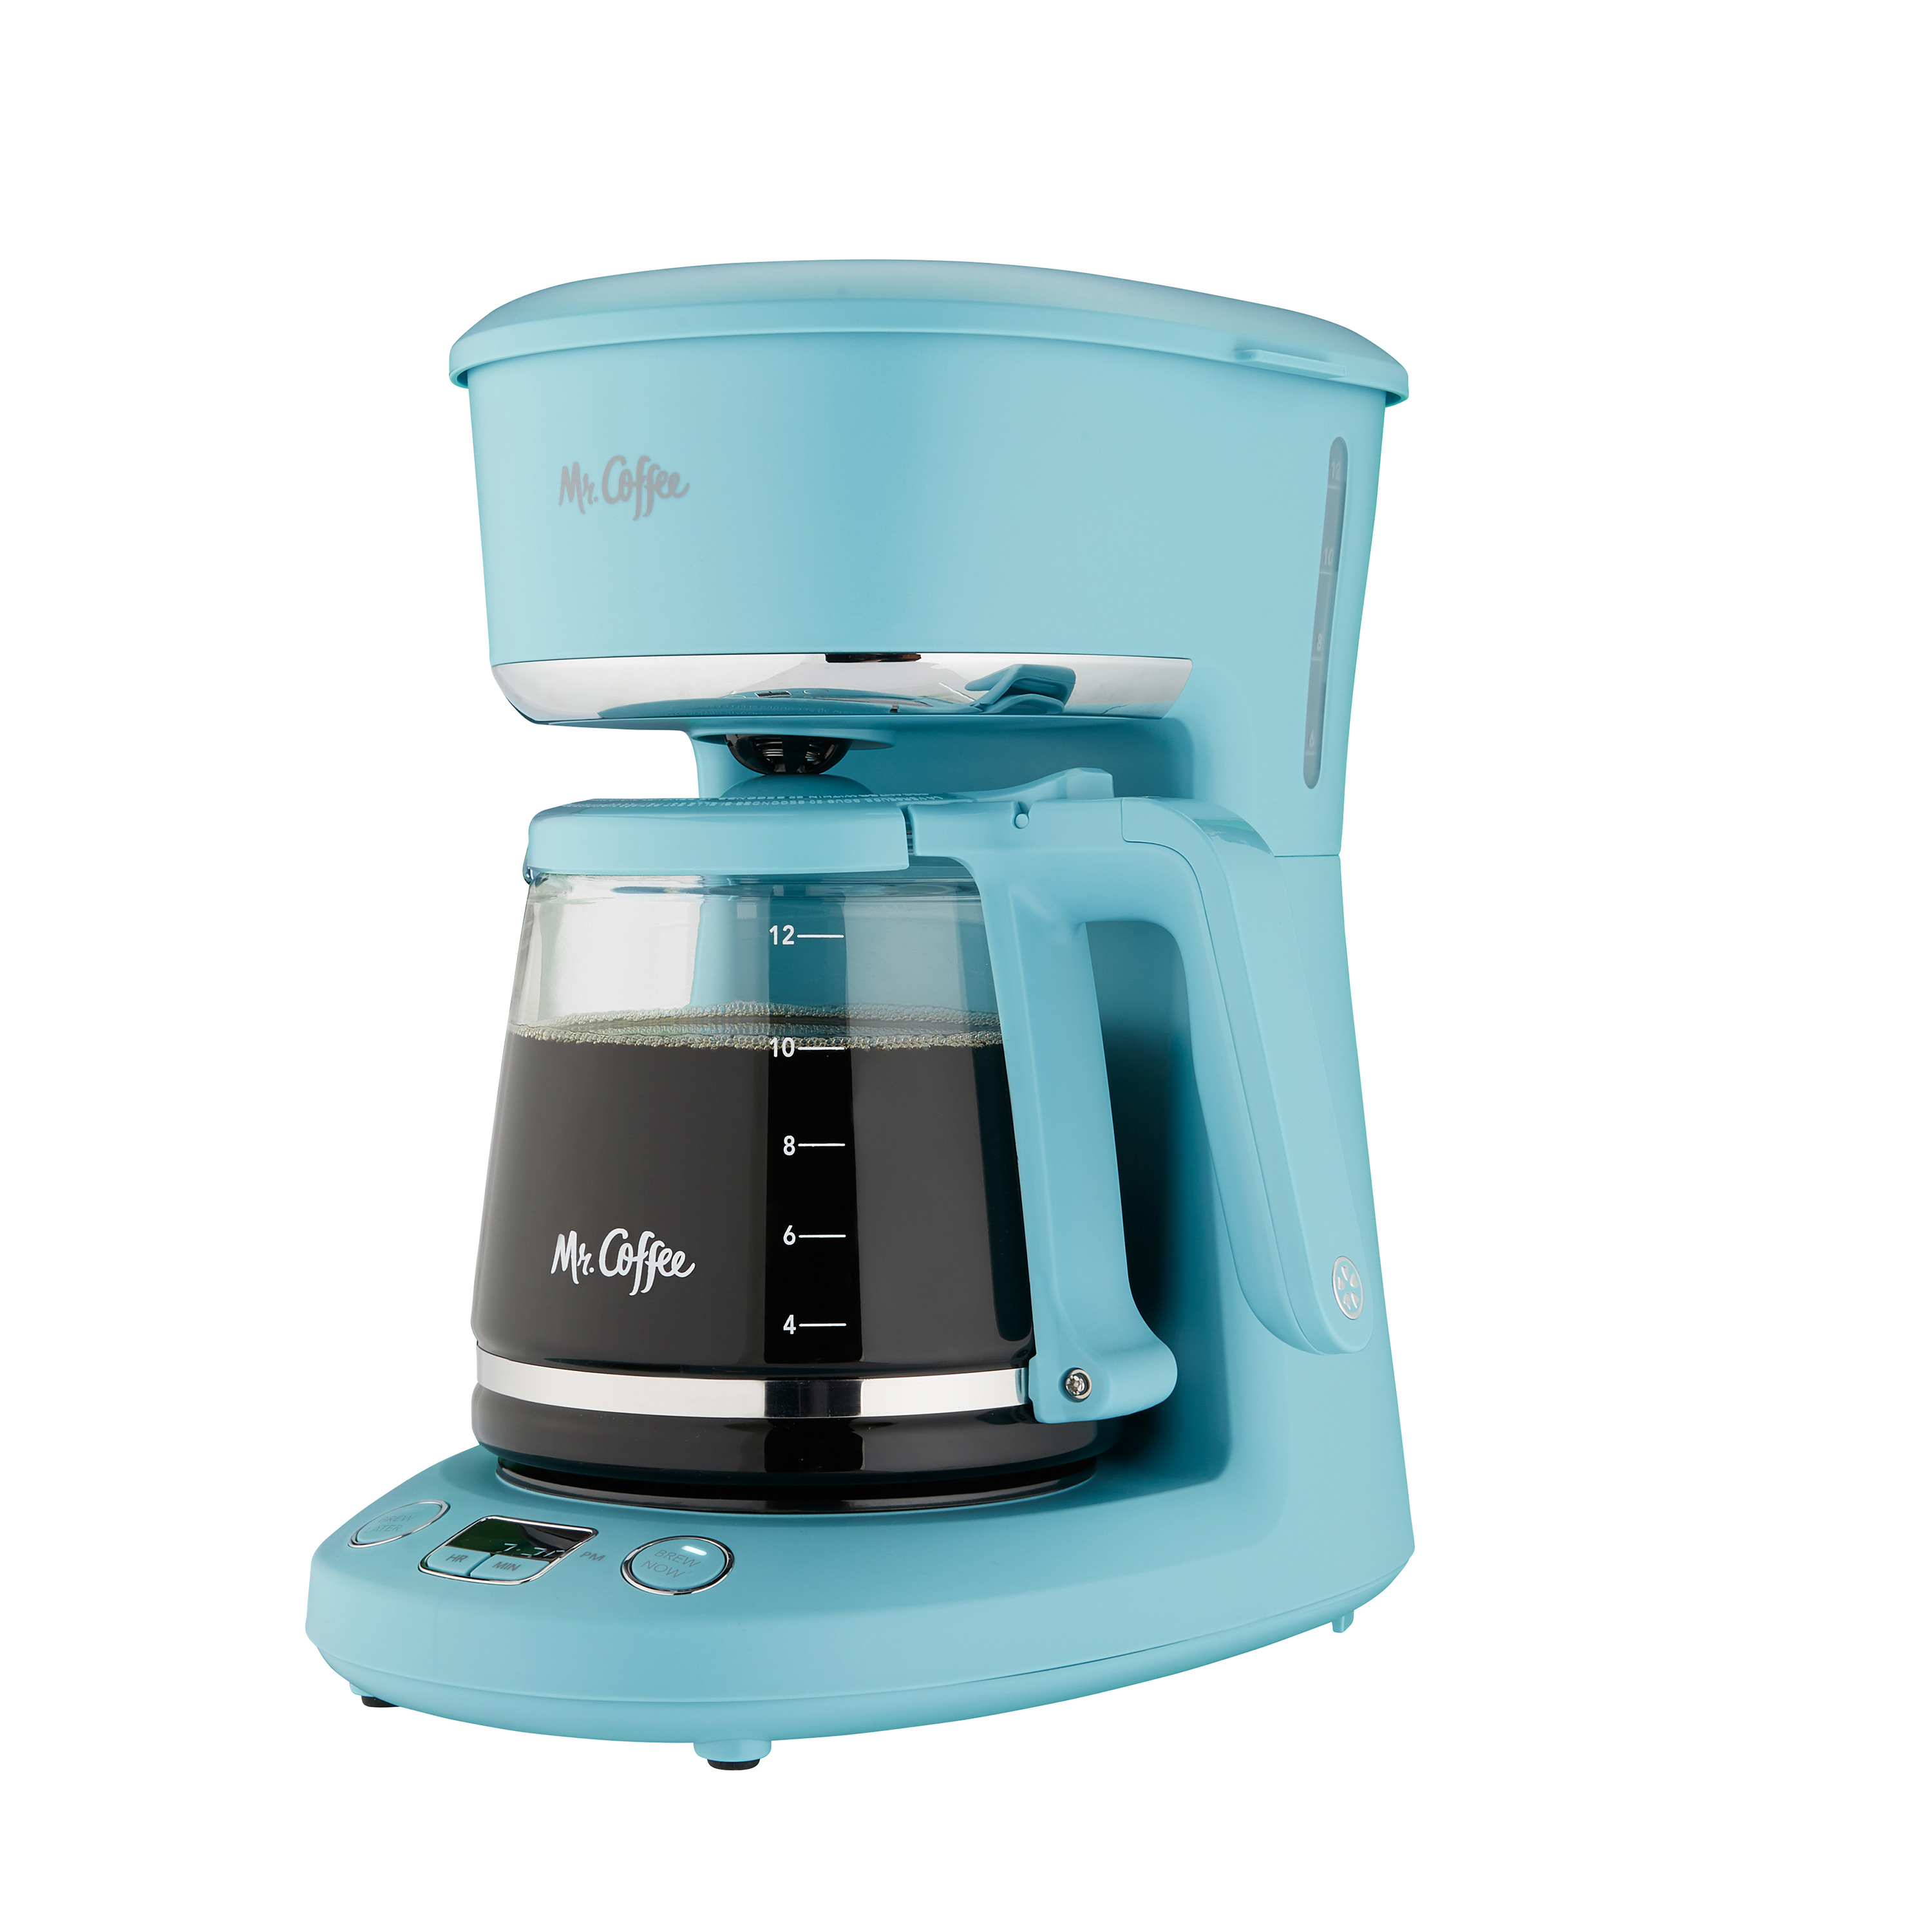 Mr. Coffee 12-Cup Programmable Coffeemaker, Arctic Blue, Brew Now or Later - image 1 of 5